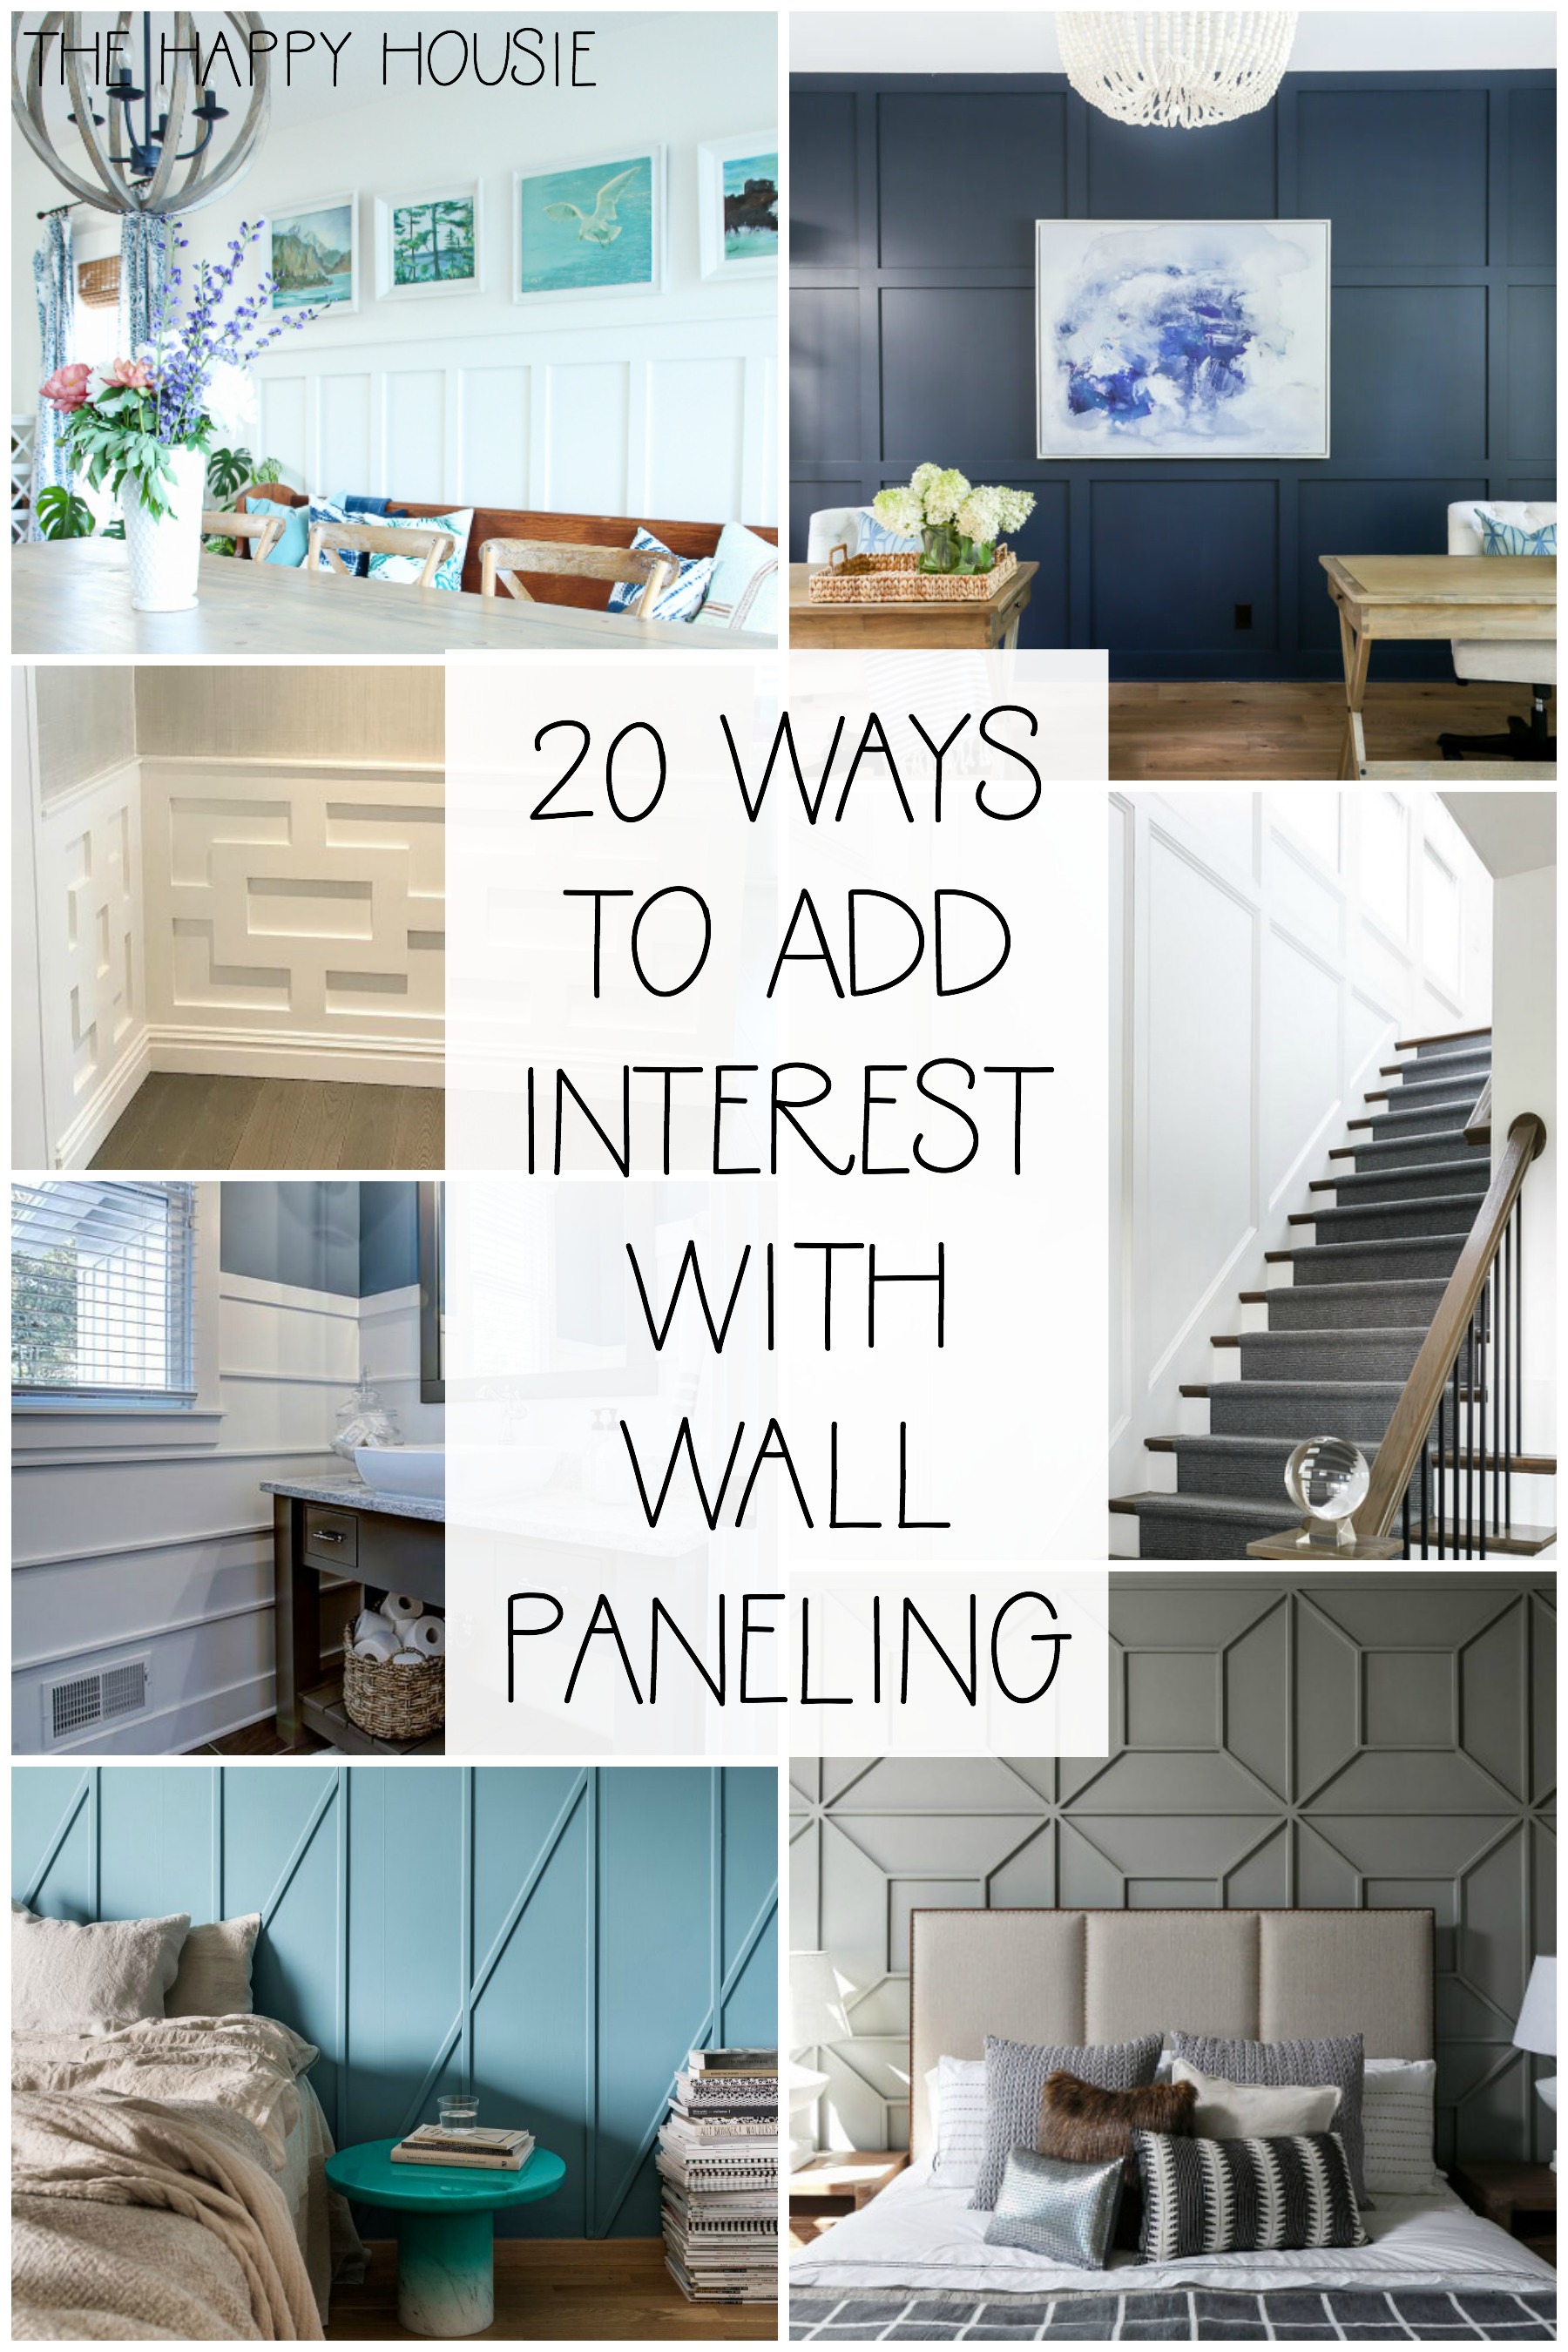 20 ways to add interest with wall paneling.